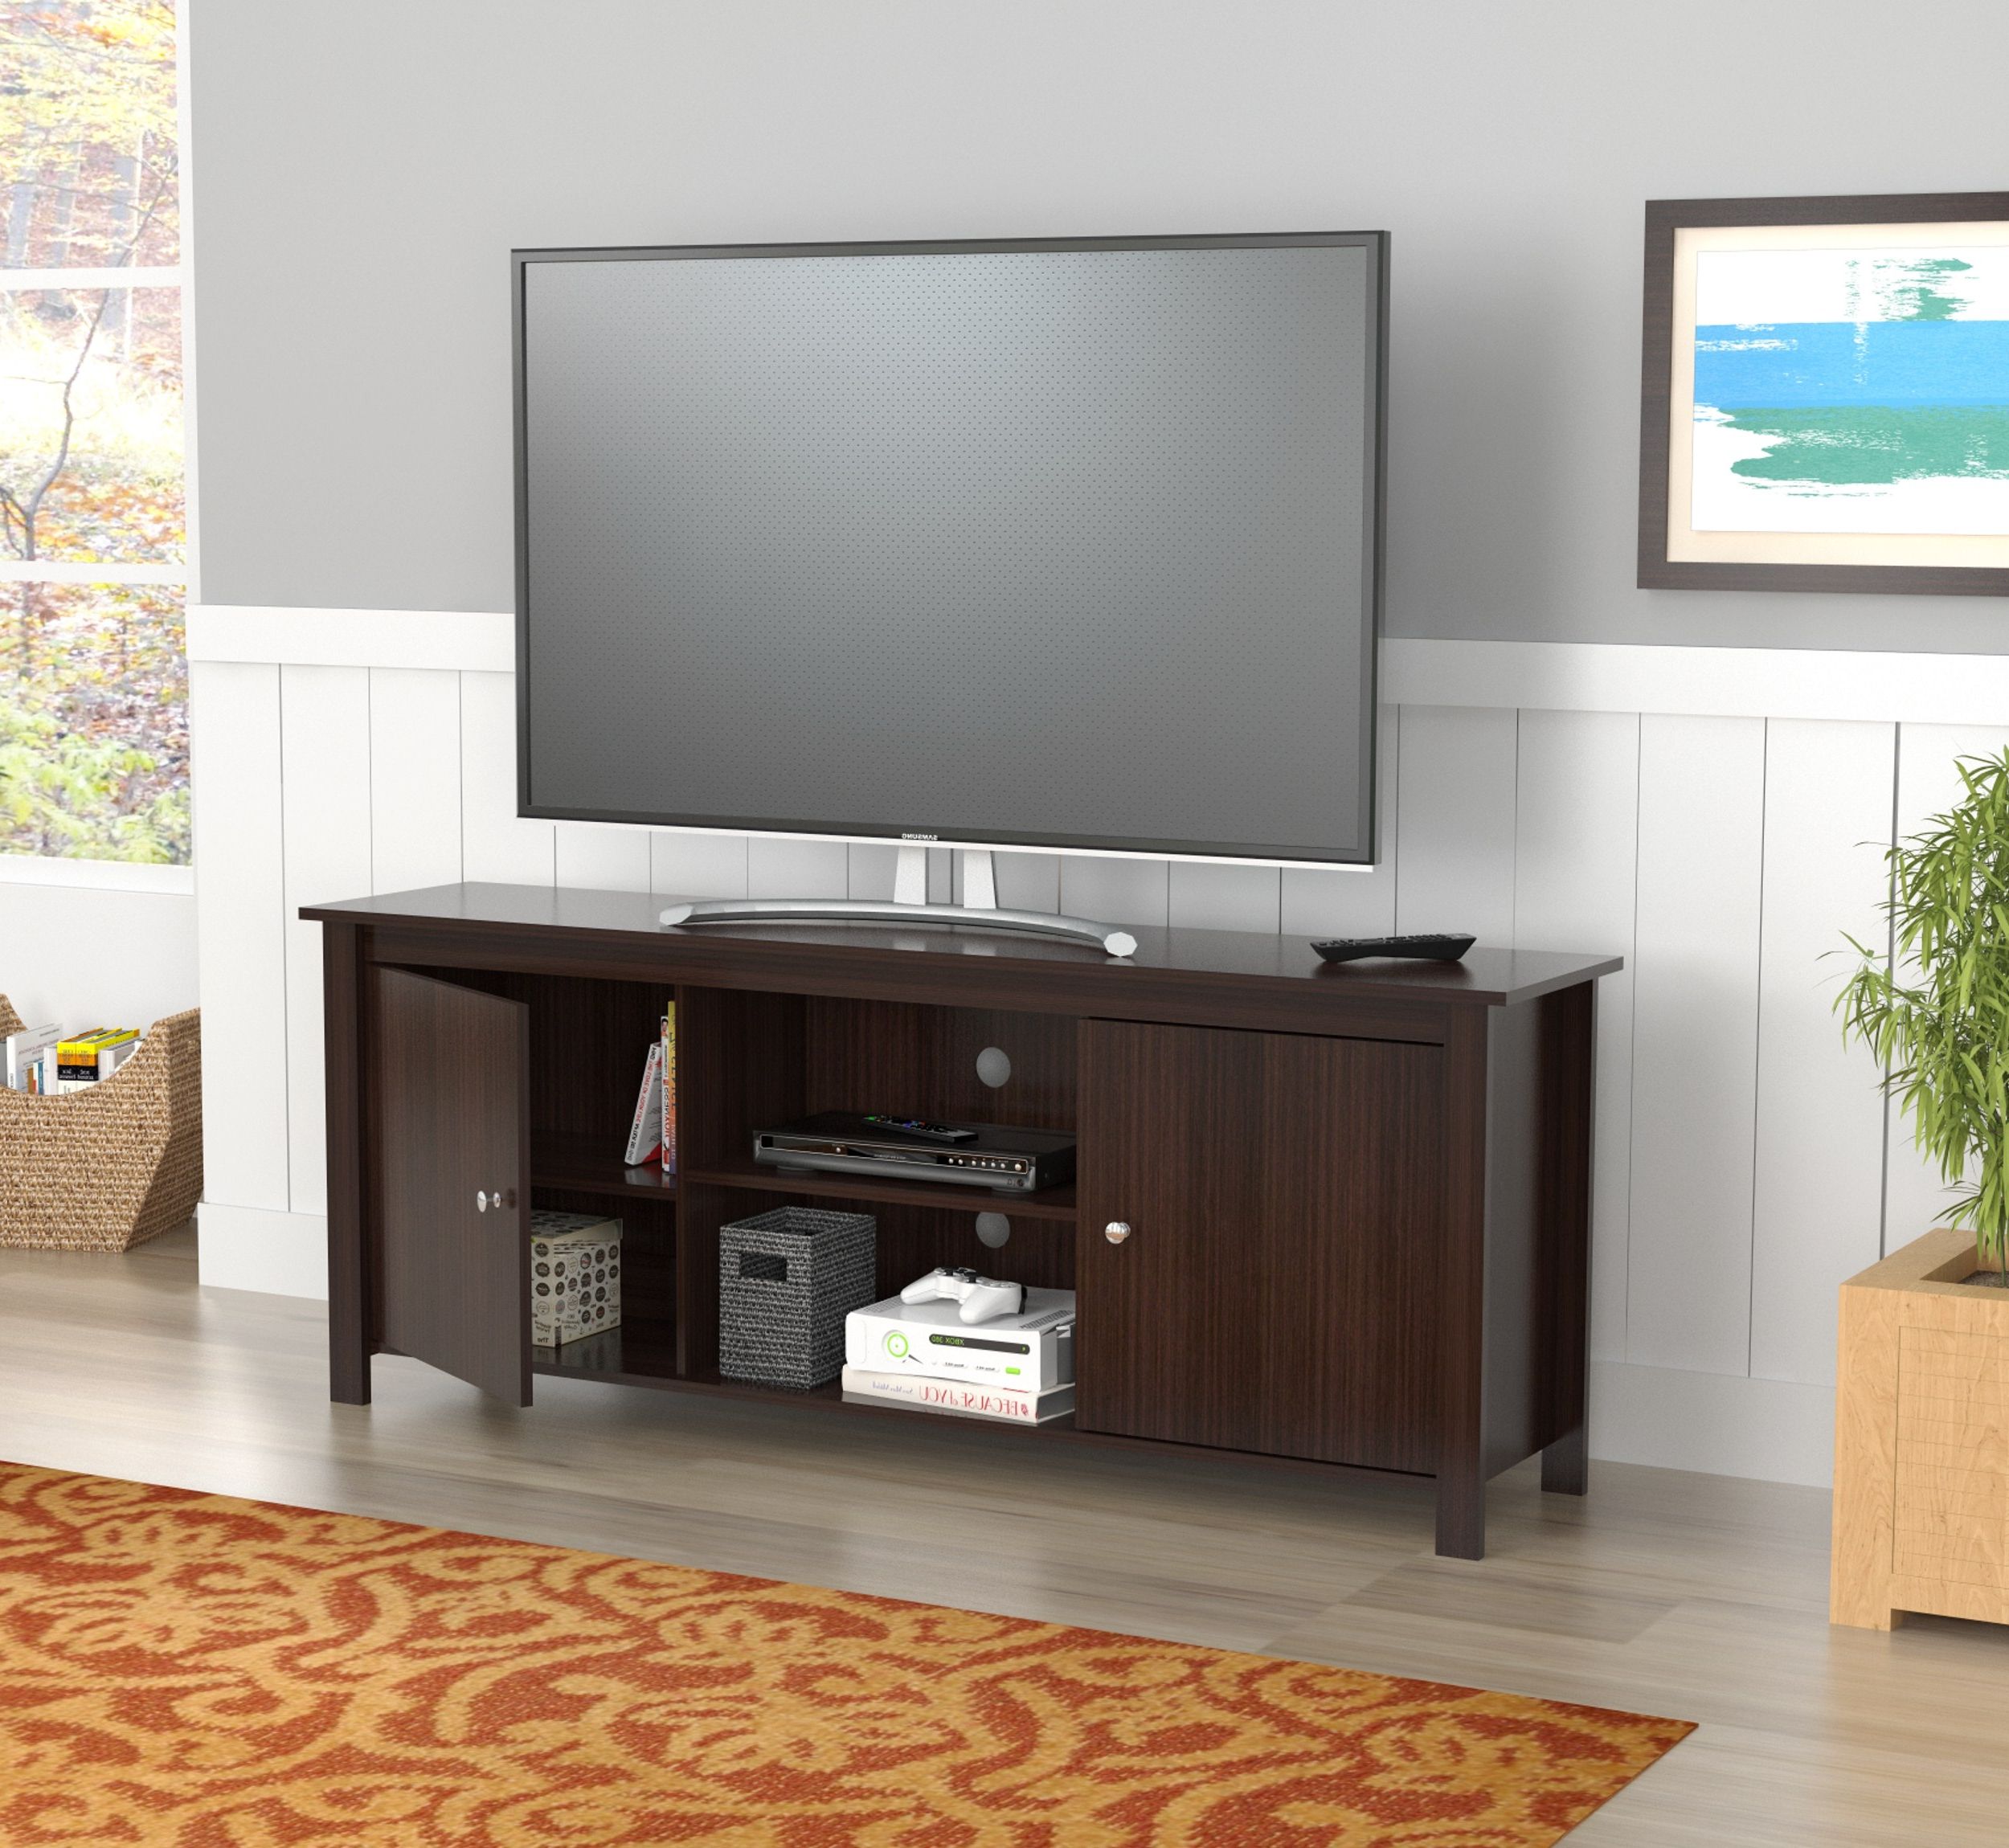 Inval Contemporary Espresso 60 Inch Tv Stand – Walmart Throughout Lorraine Tv Stands For Tvs Up To 60" (Gallery 19 of 20)